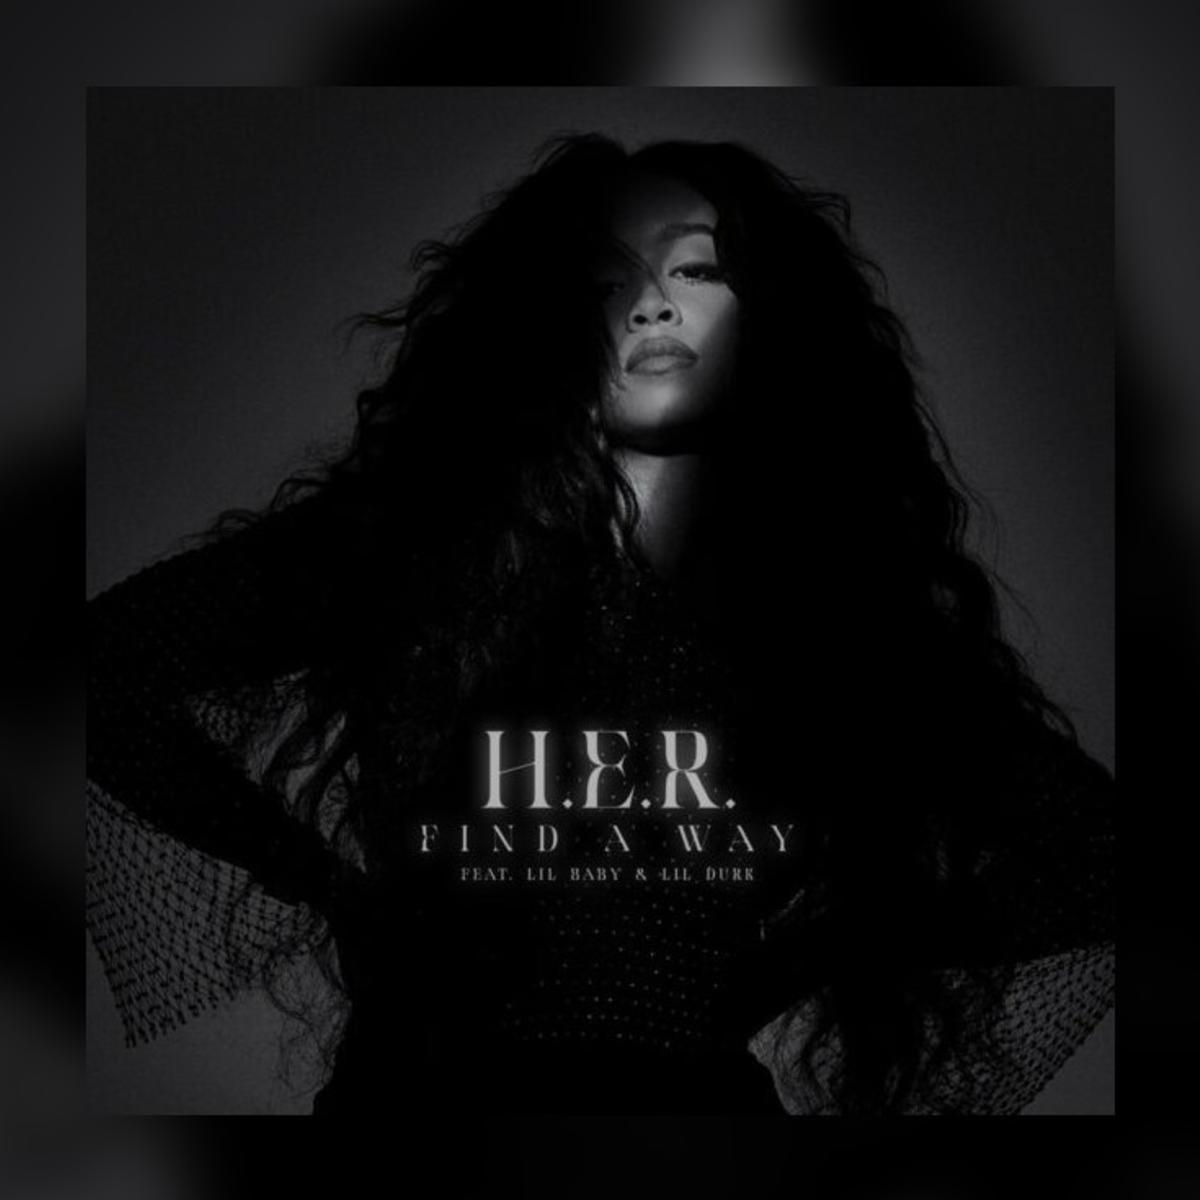 H.E.R. Adds Lil Durk To “Find A Way” With Lil Baby